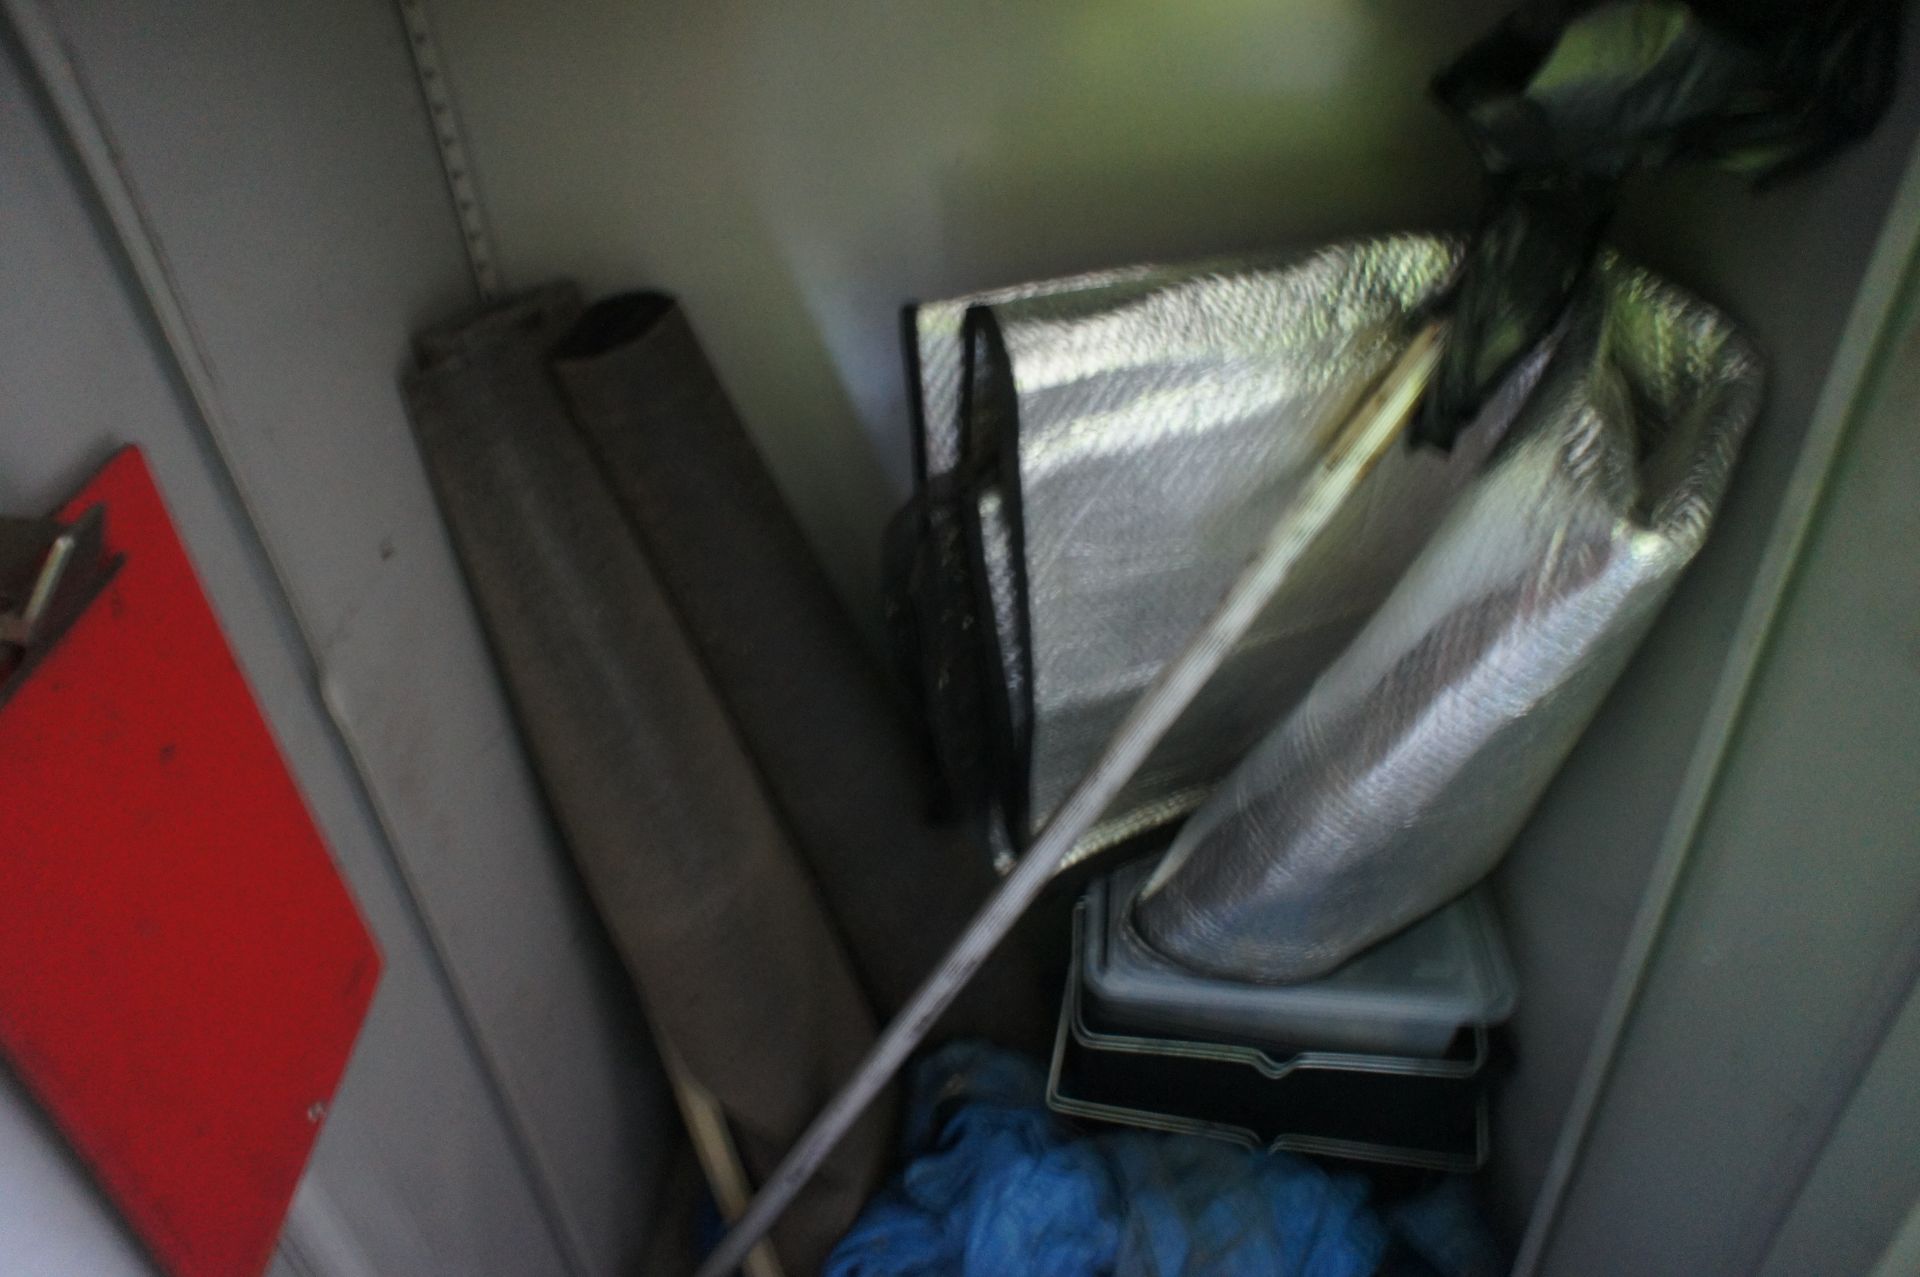 Cabinet & contents including ducting, gaskets etc. - Image 3 of 3